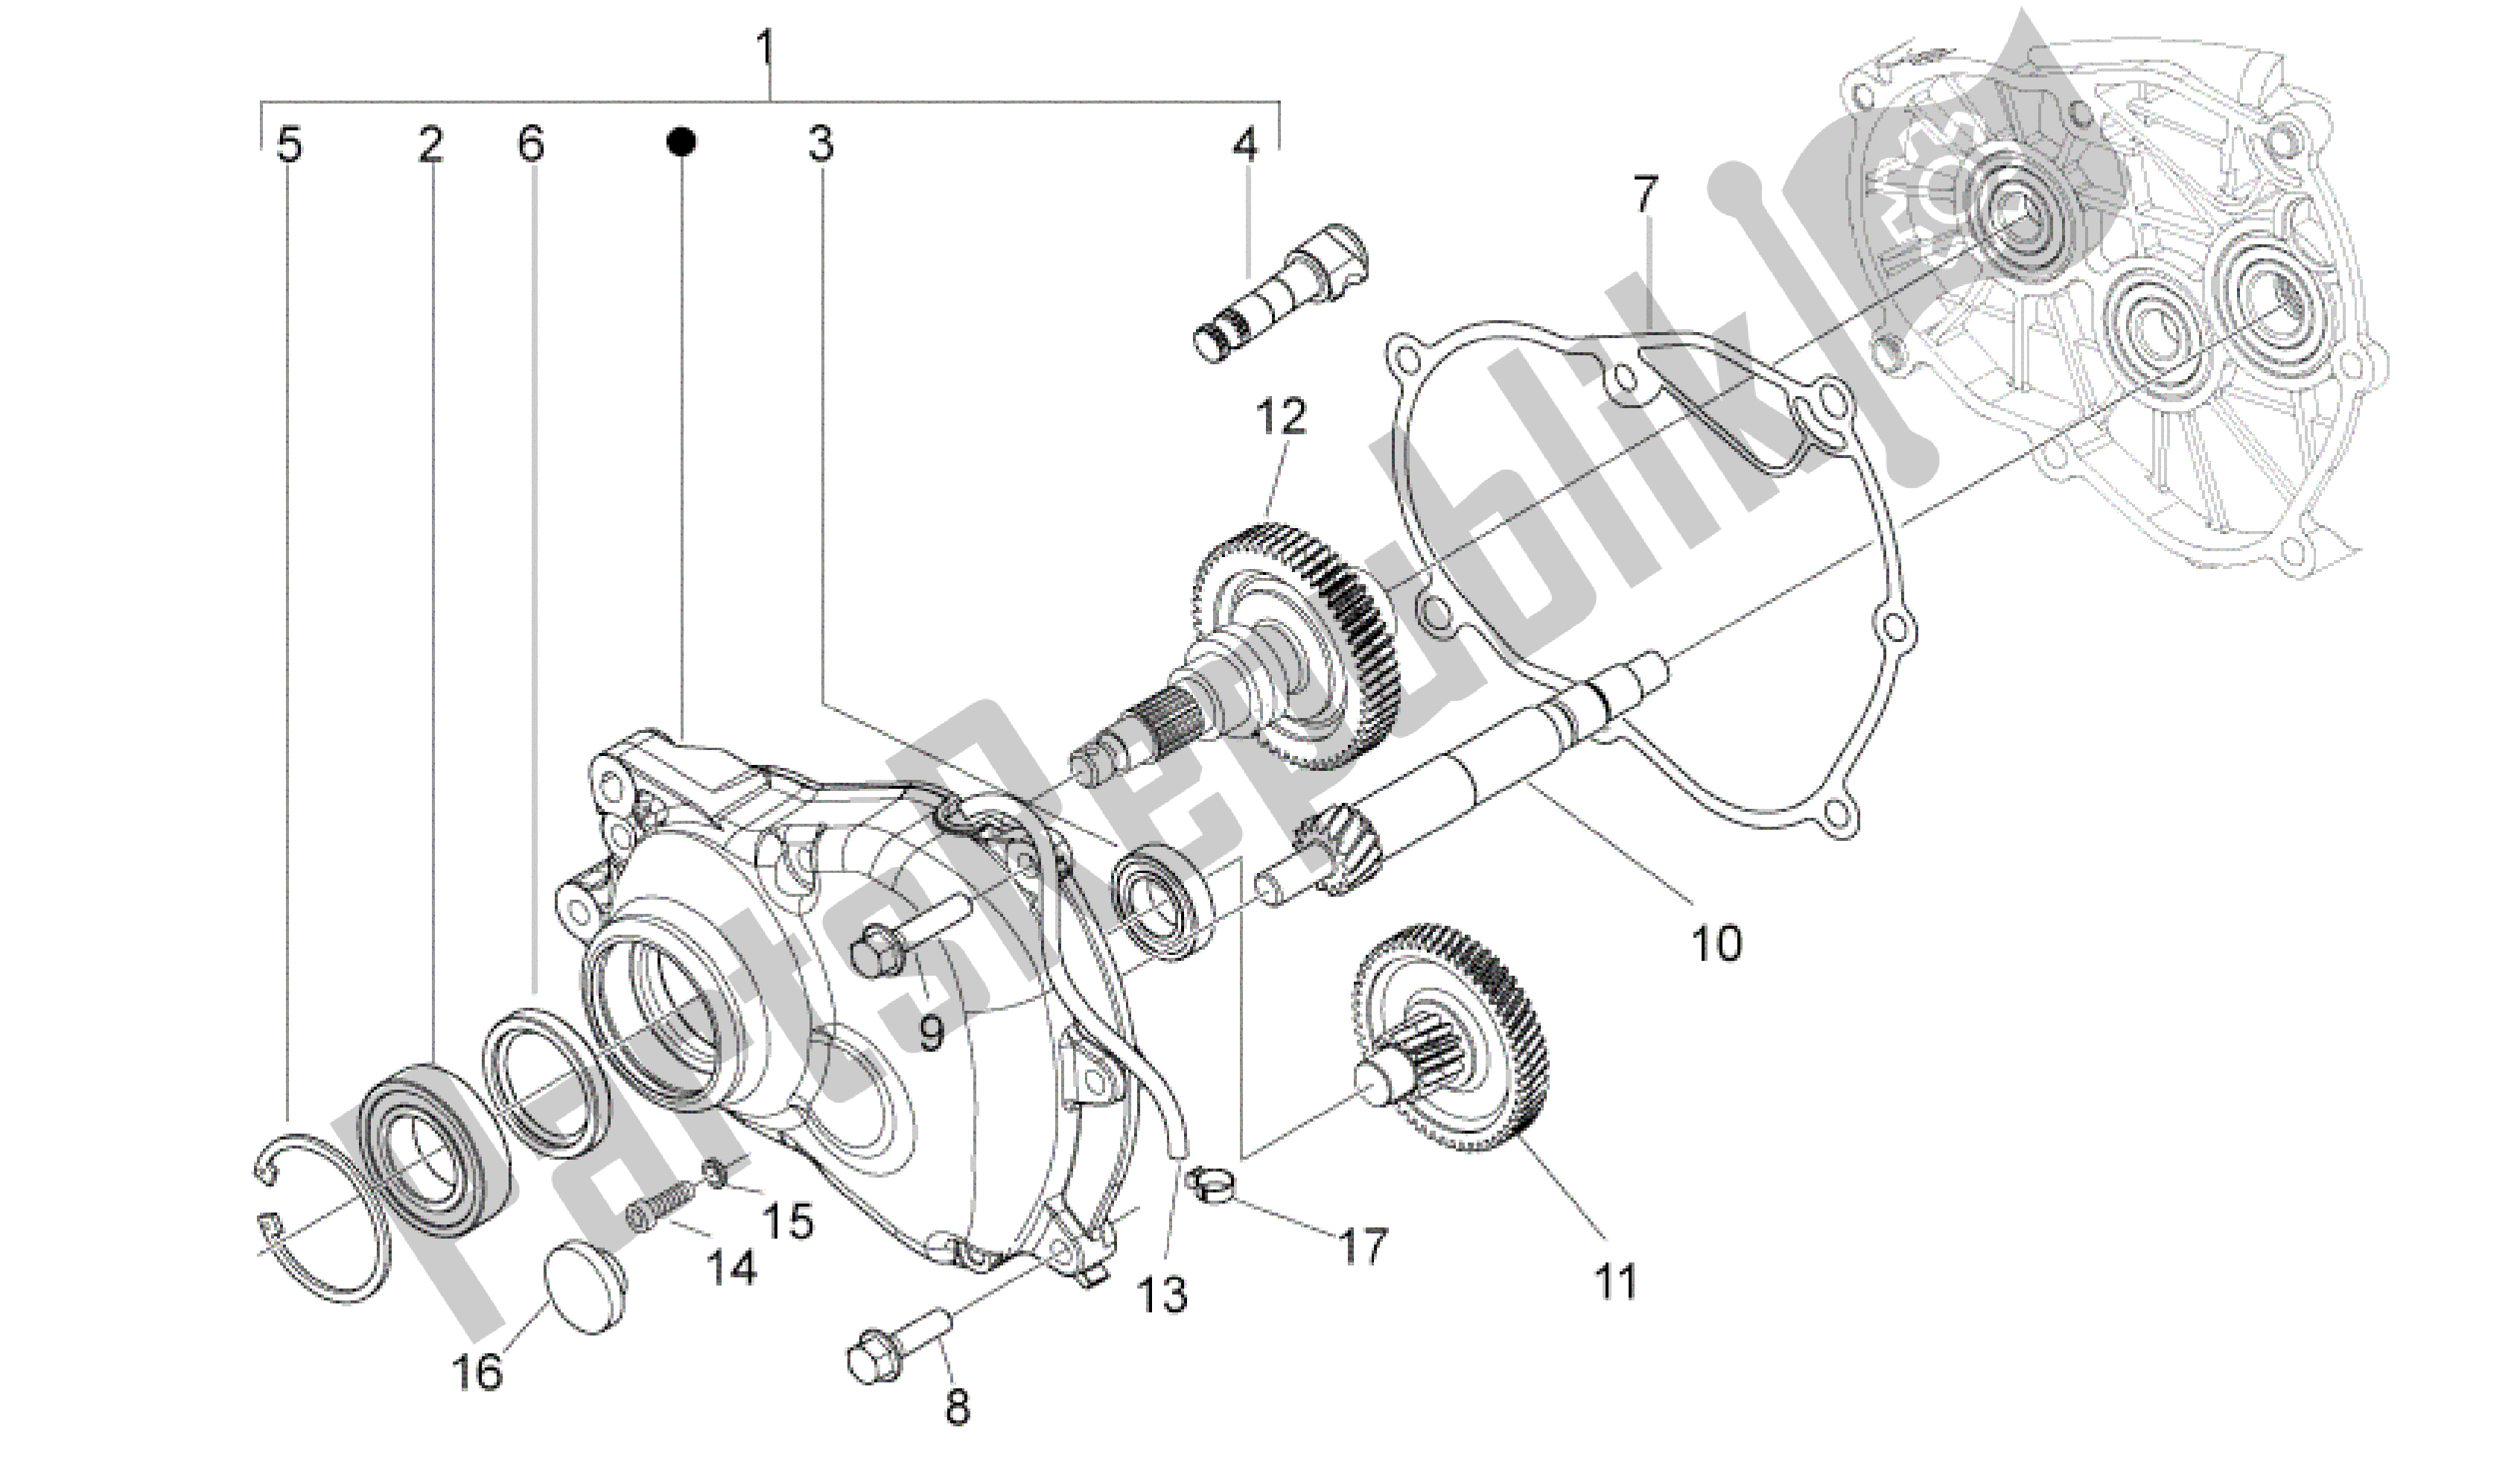 All parts for the Transmission of the Aprilia Sport City 125 2008 - 2010